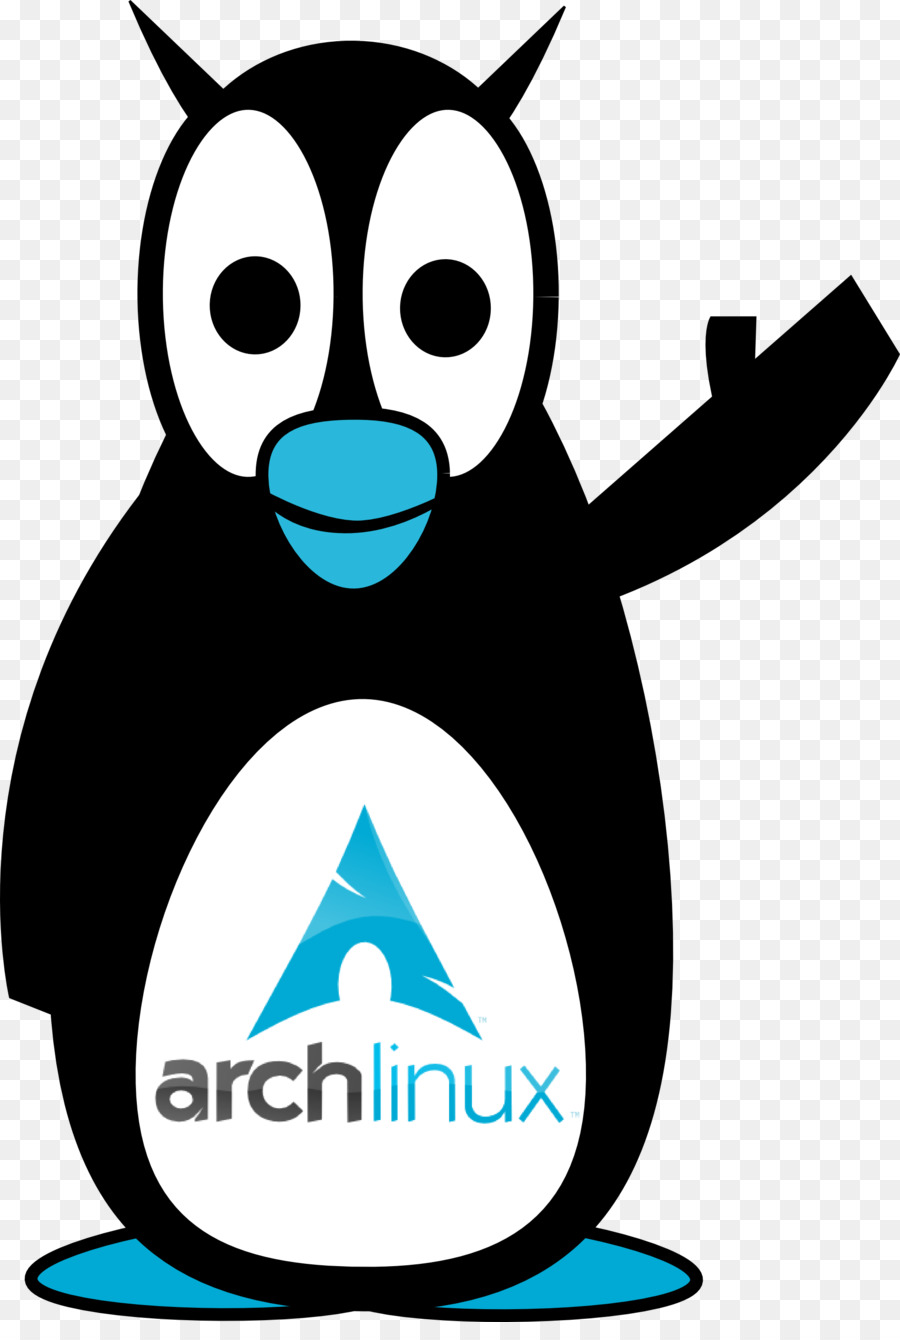 Why is Linux Trending? | Automation World